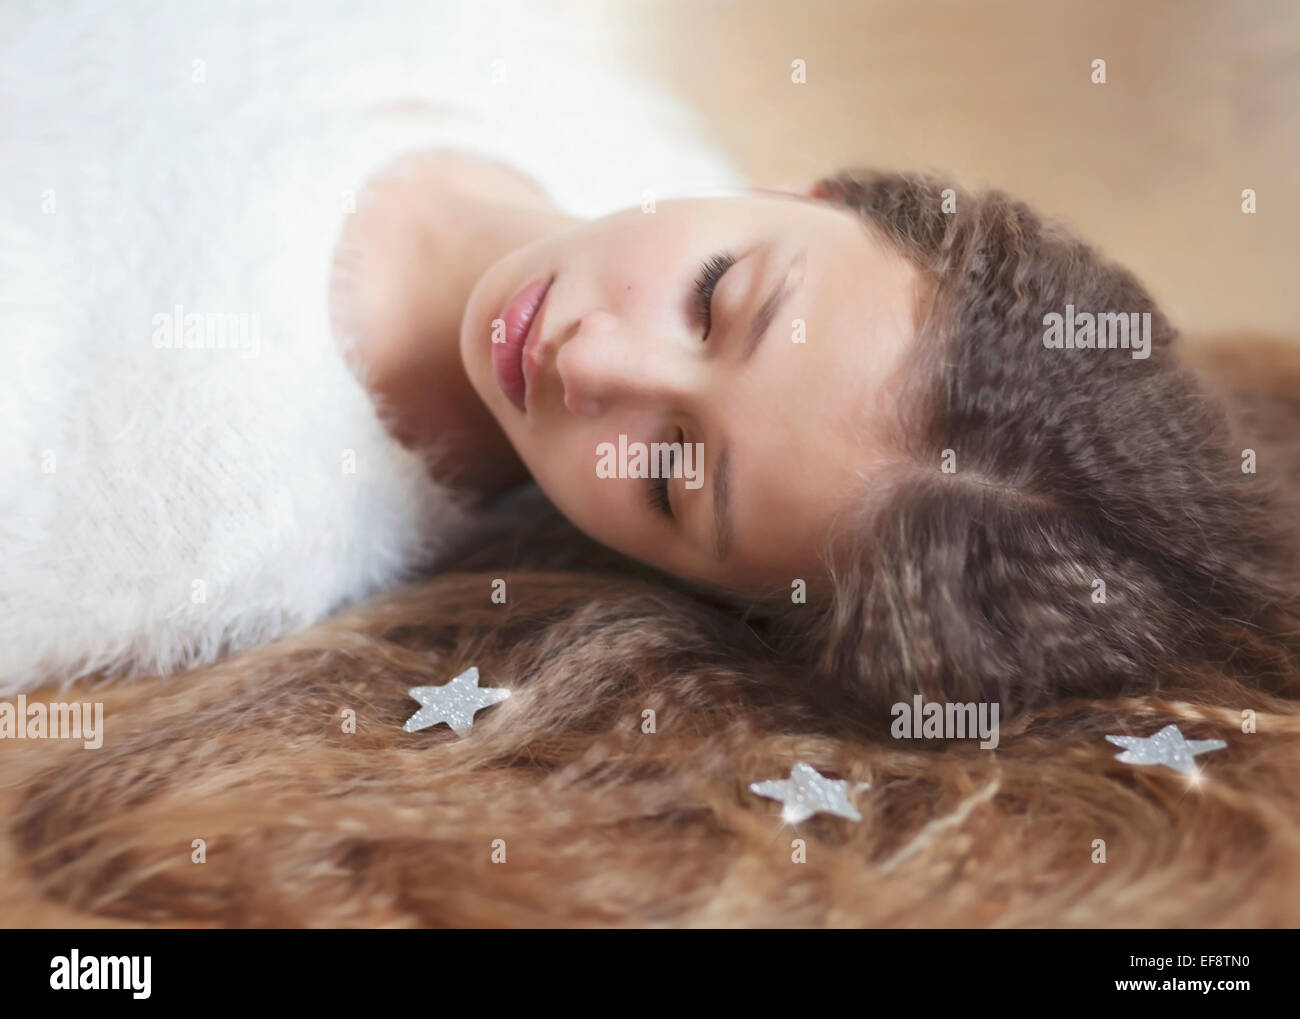 Portrait of girl (12-13) with long hair lying down Stock Photo